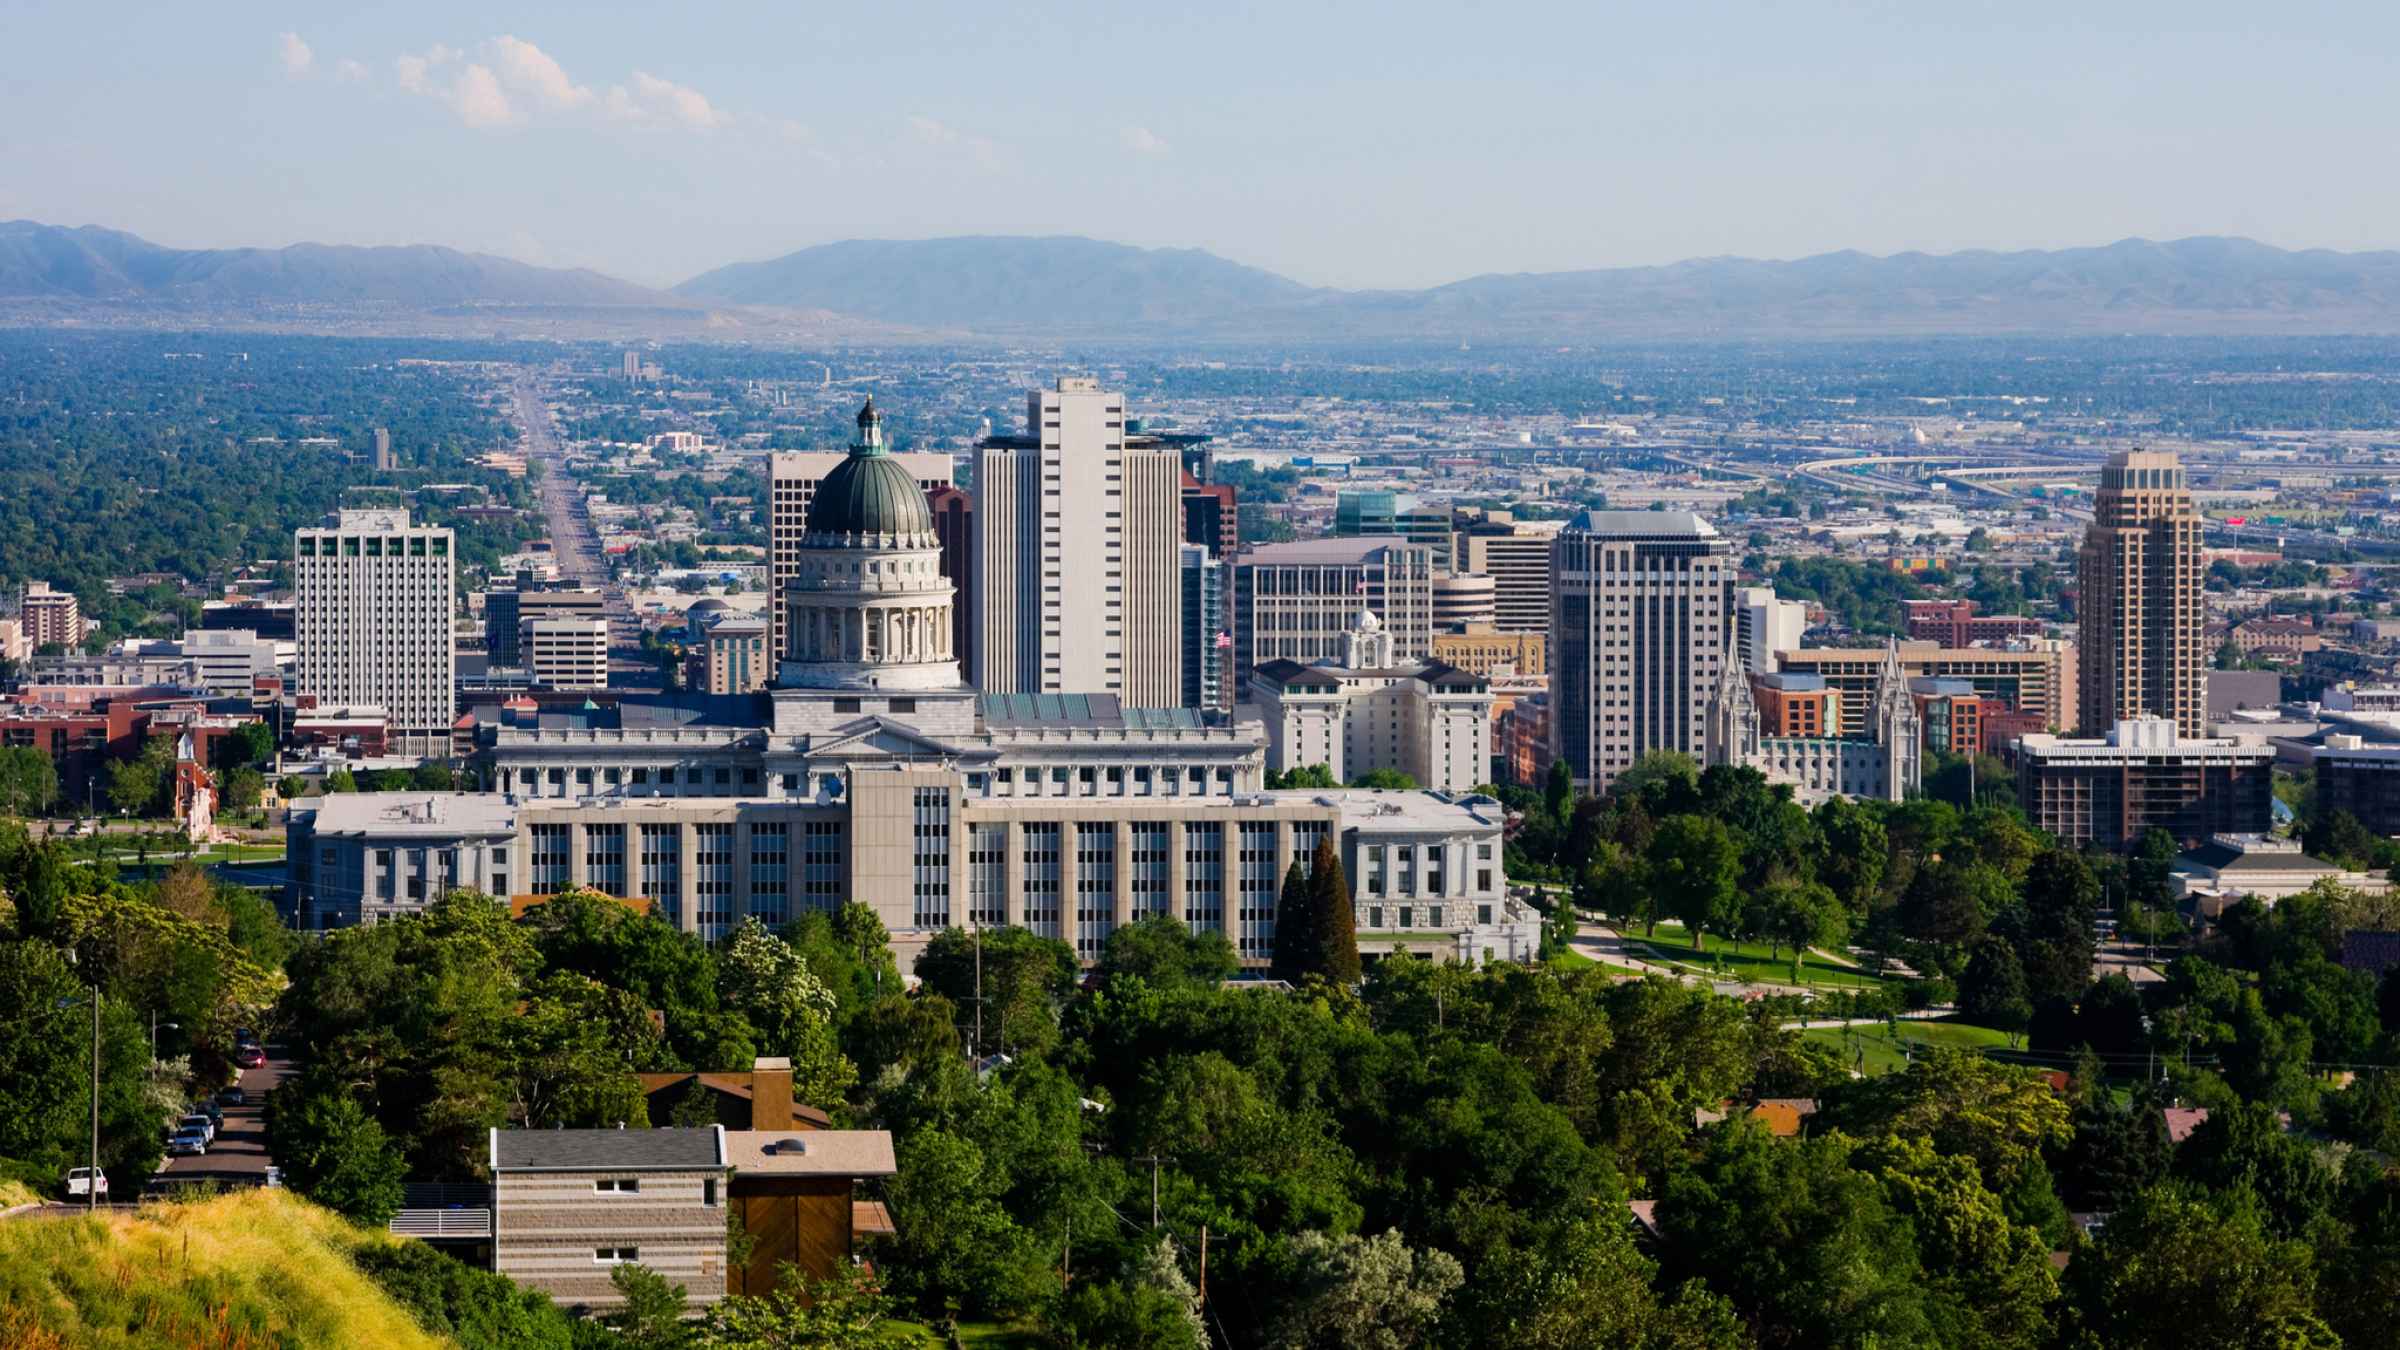 Salt Lake City 2021: Top 10 Tours & Activities (with Photos) - Things